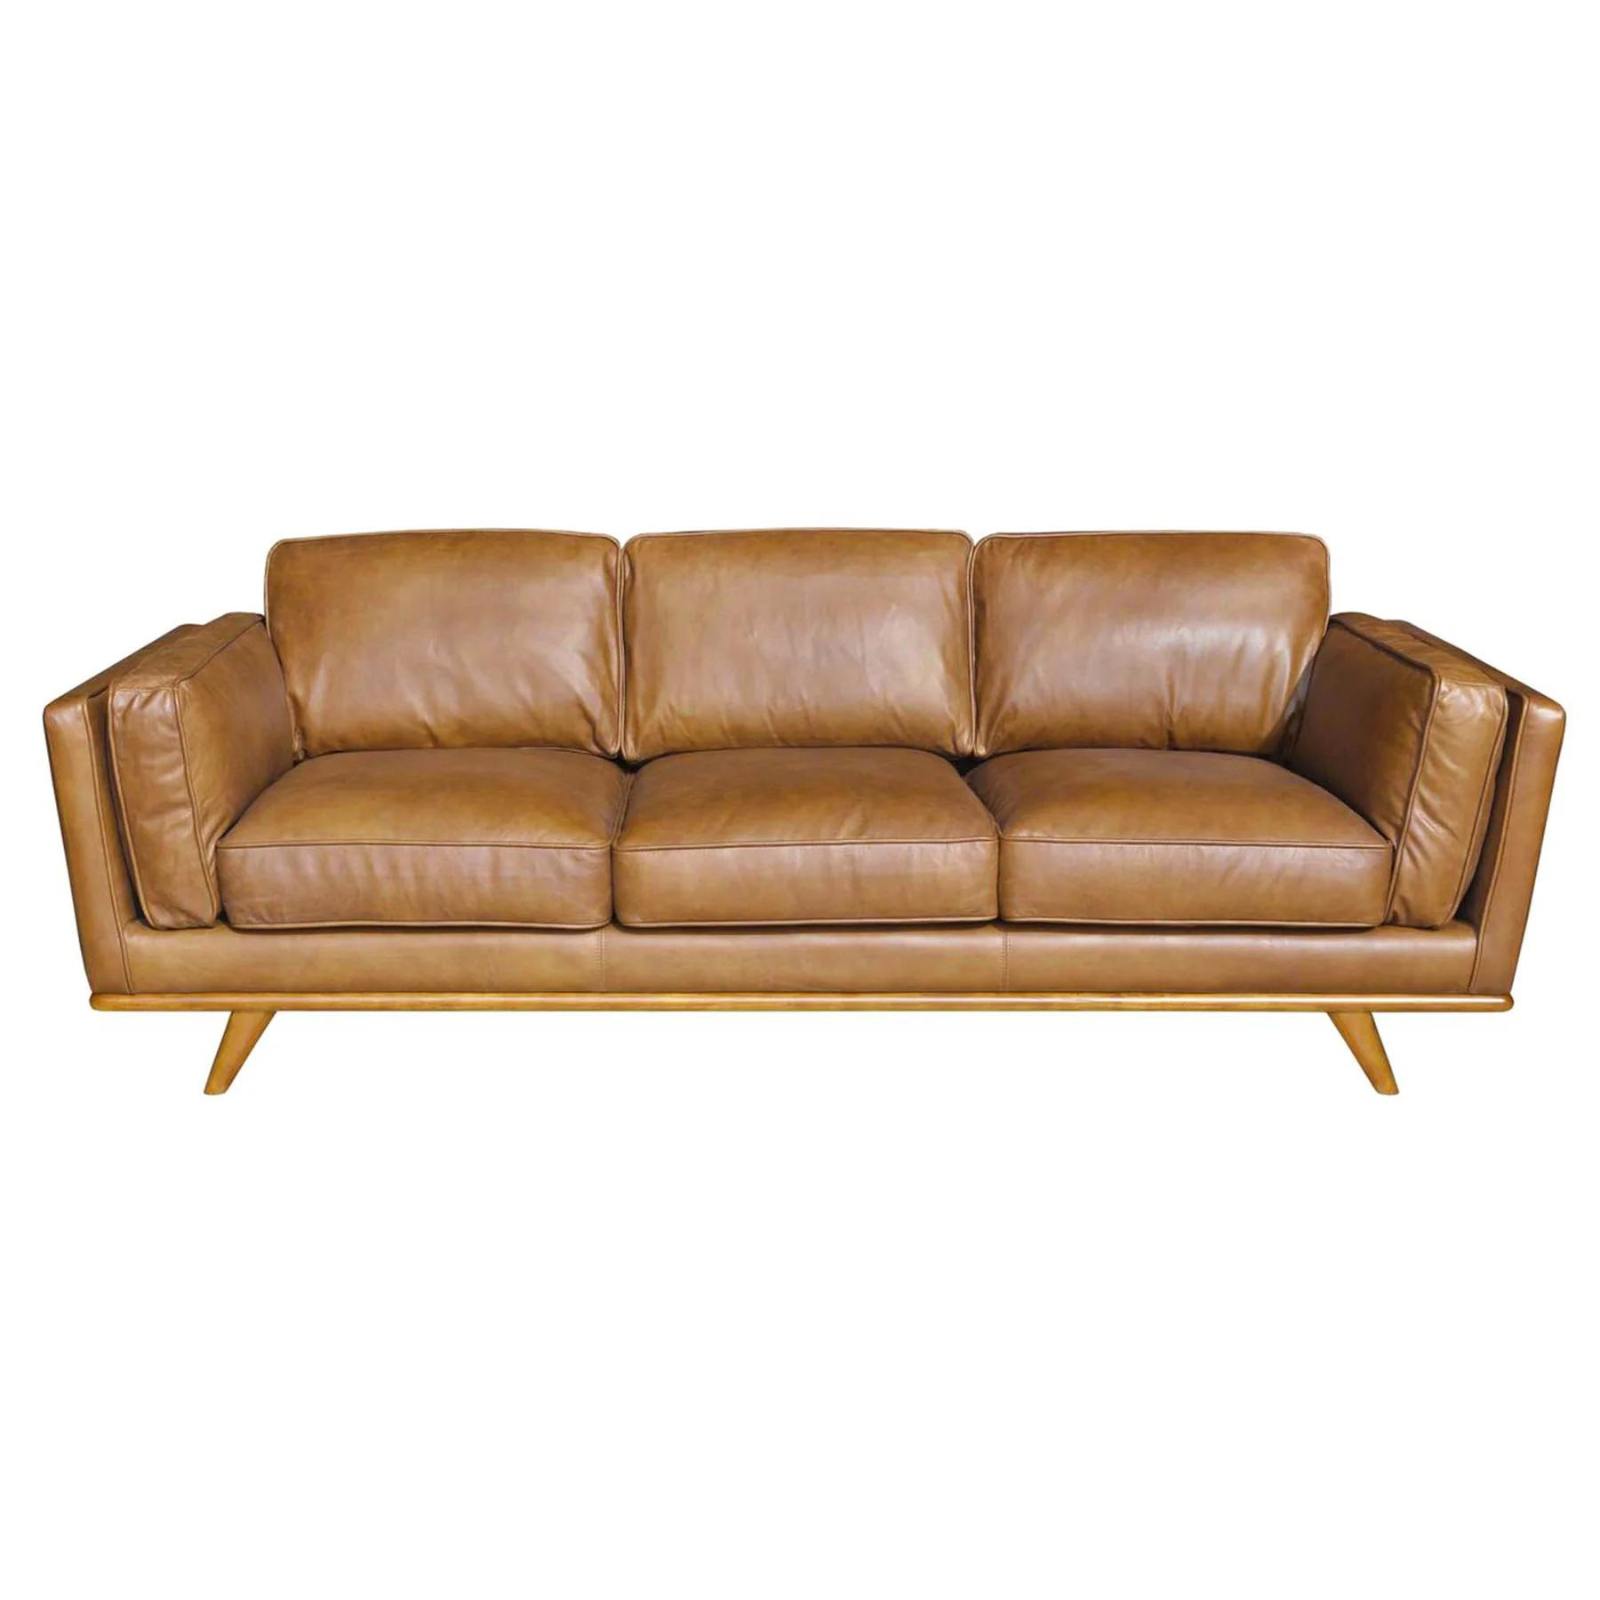 Arianna Sofa - Russet Leather - Rug & Weave